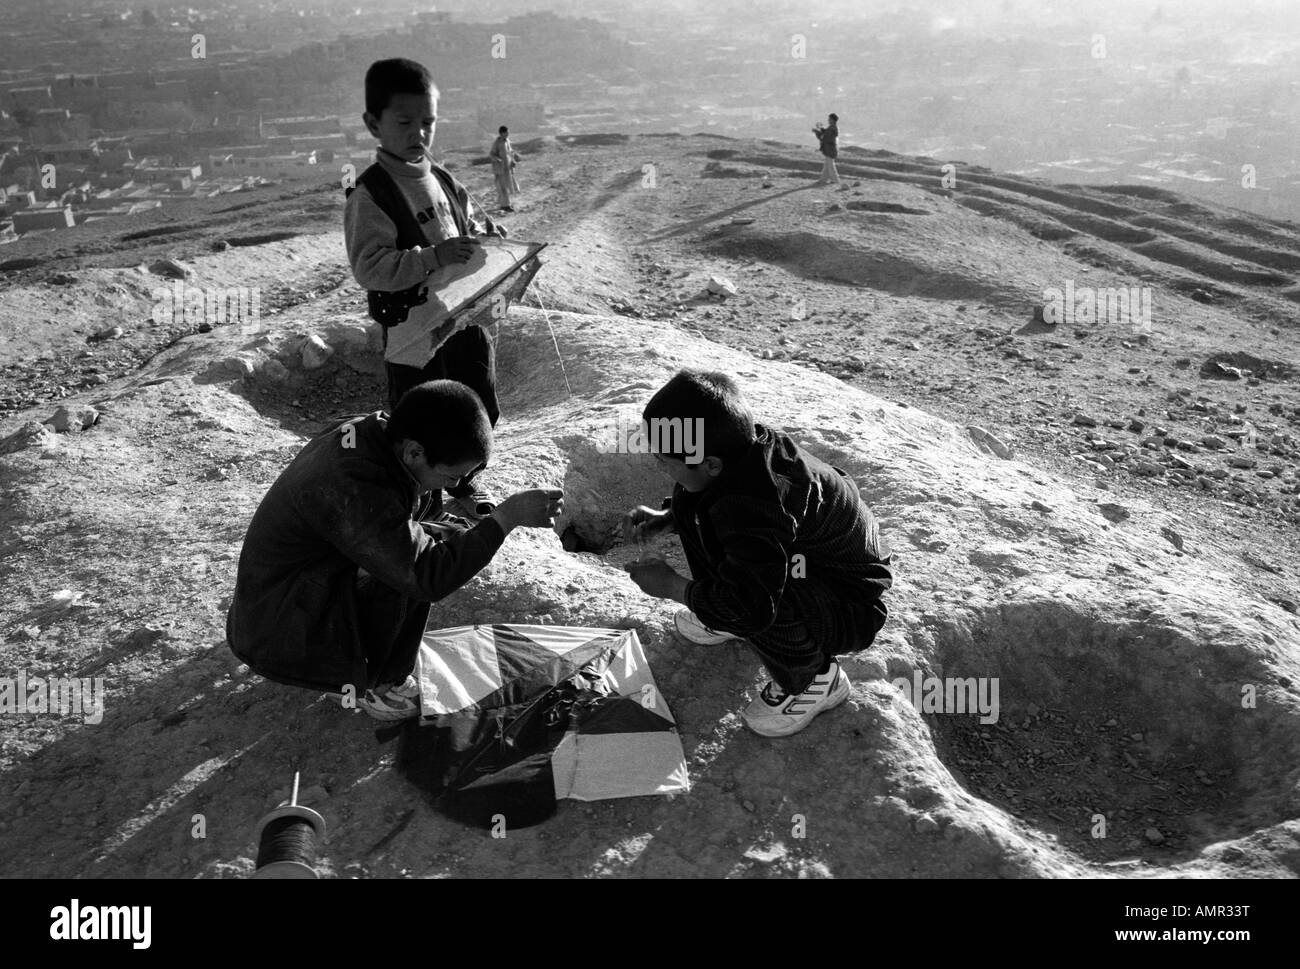 Boys repair their kite on a hill in Kabul Afghanistan August 2005 Stock Photo